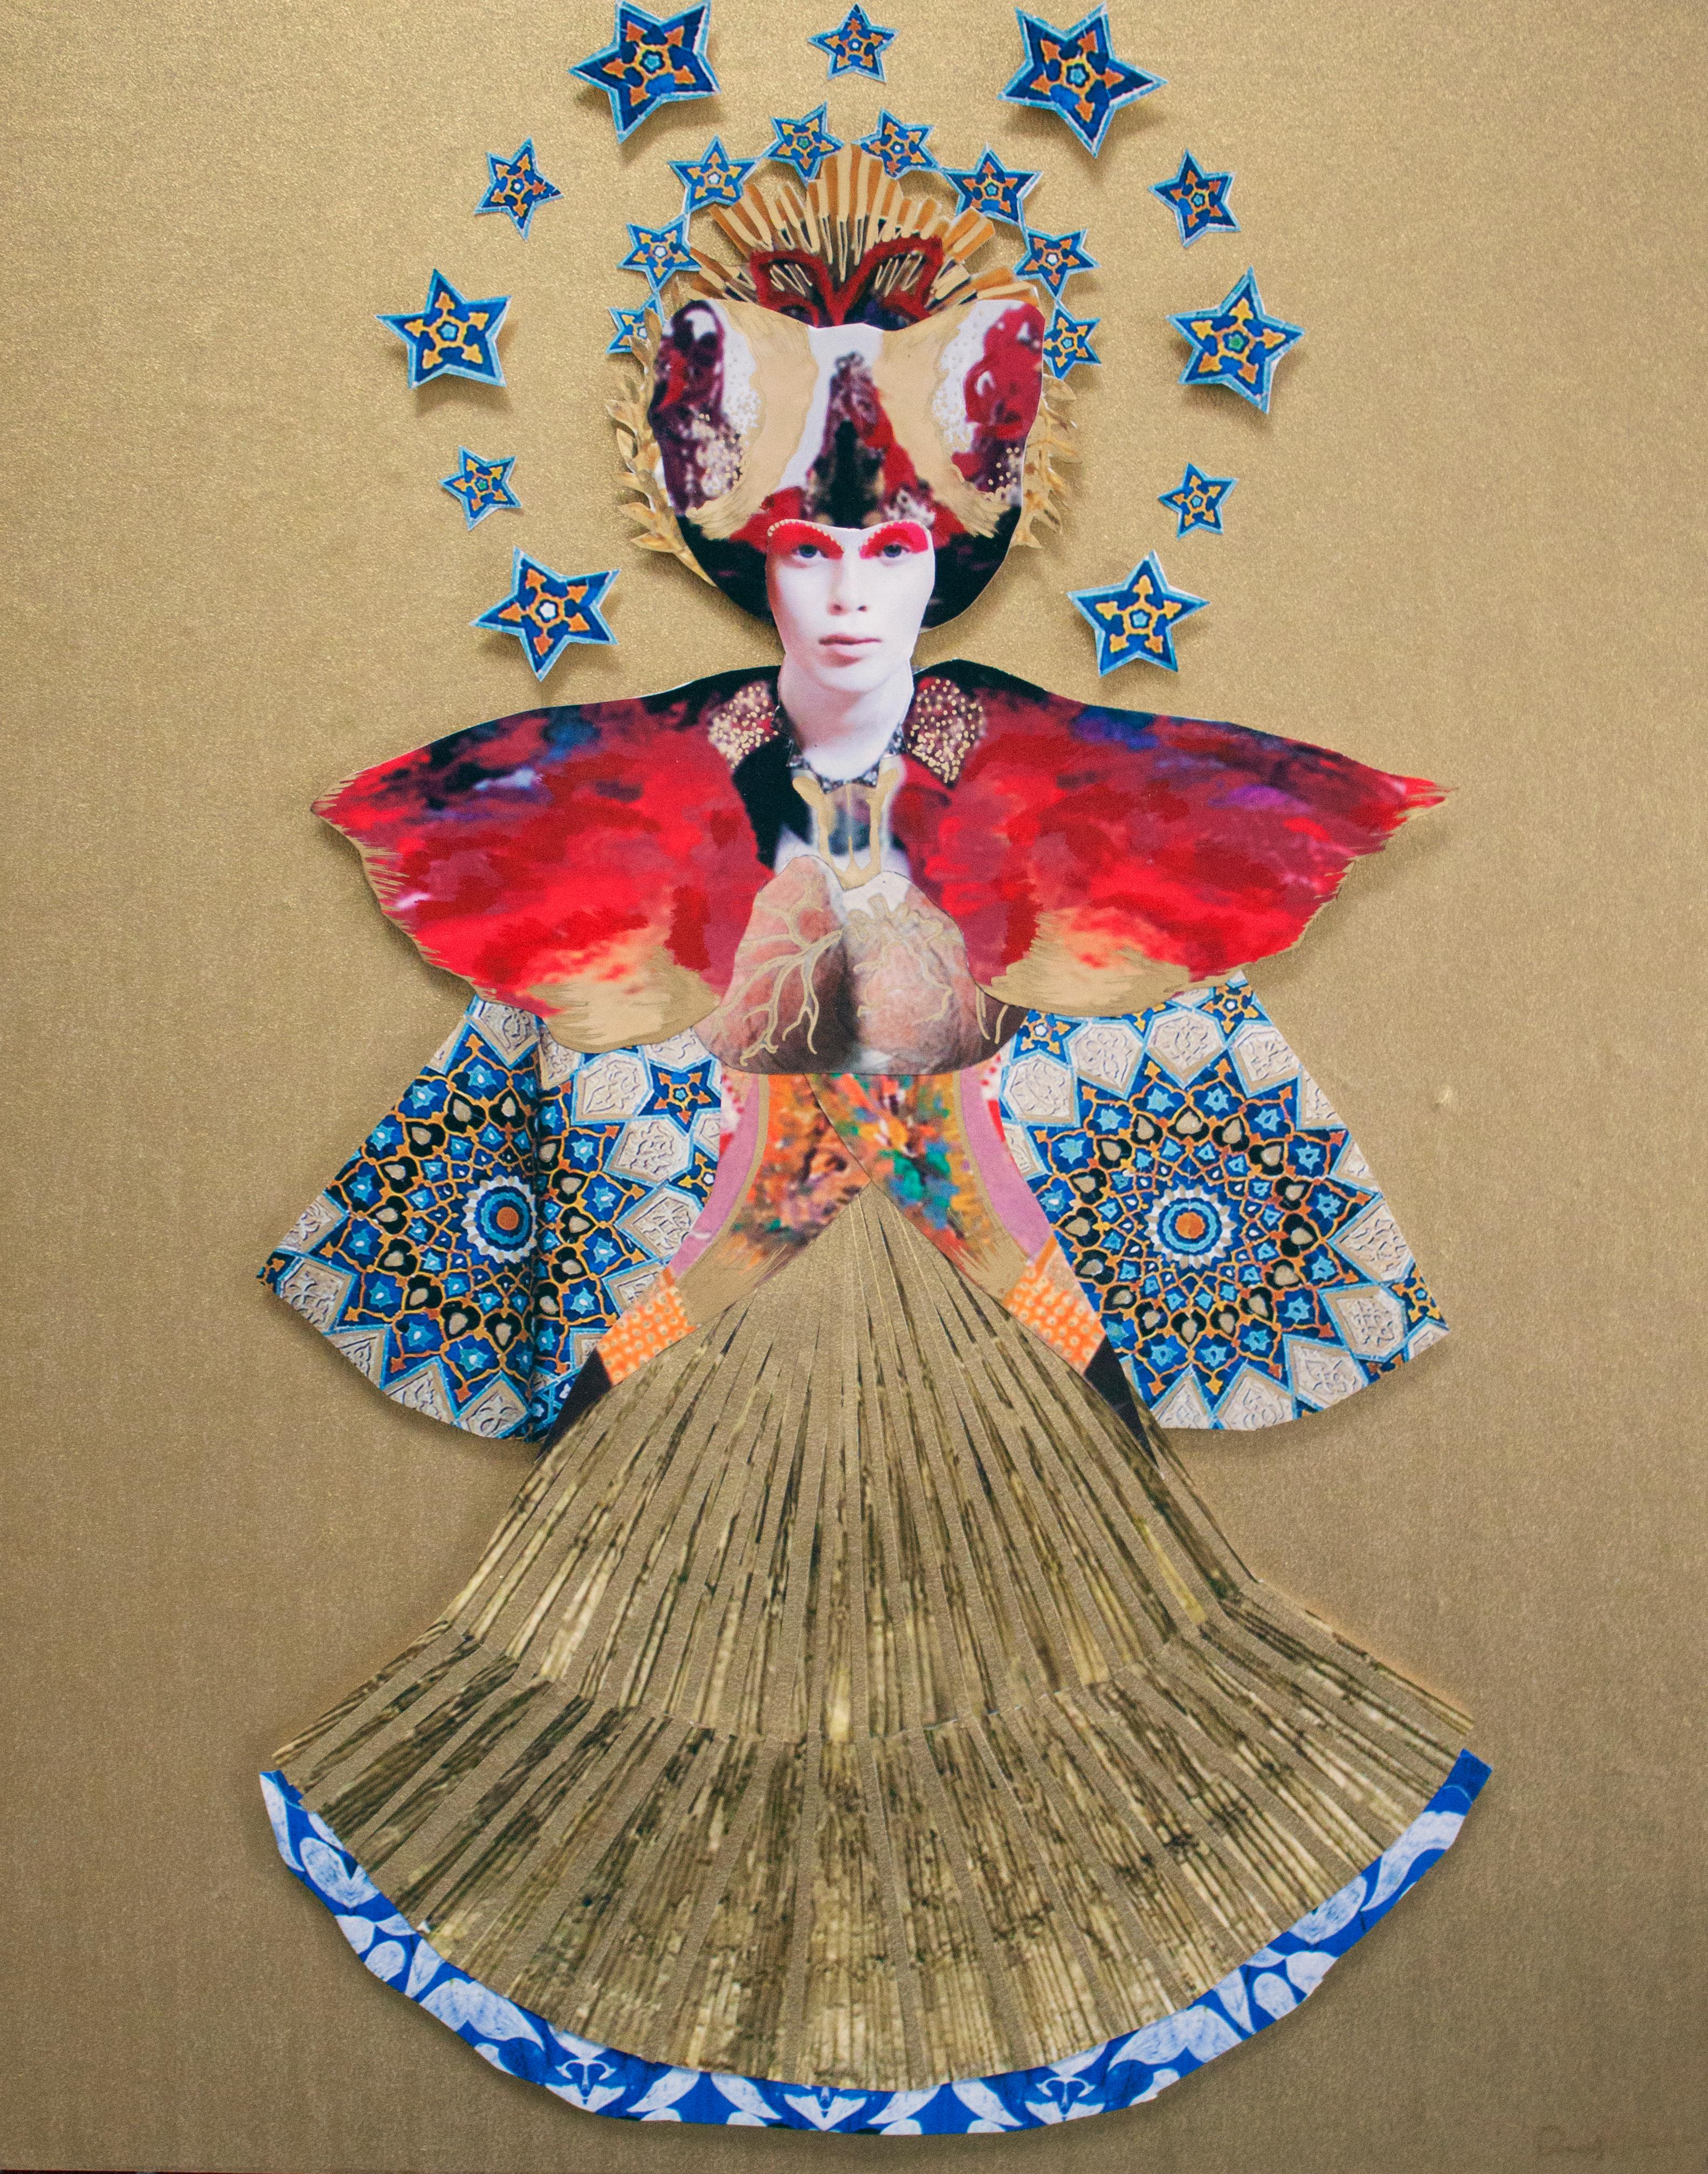 Fire Goddess, gold, red & blue painting and collage relief, figurative portrait - Mixed Media Art by Deming King Harriman